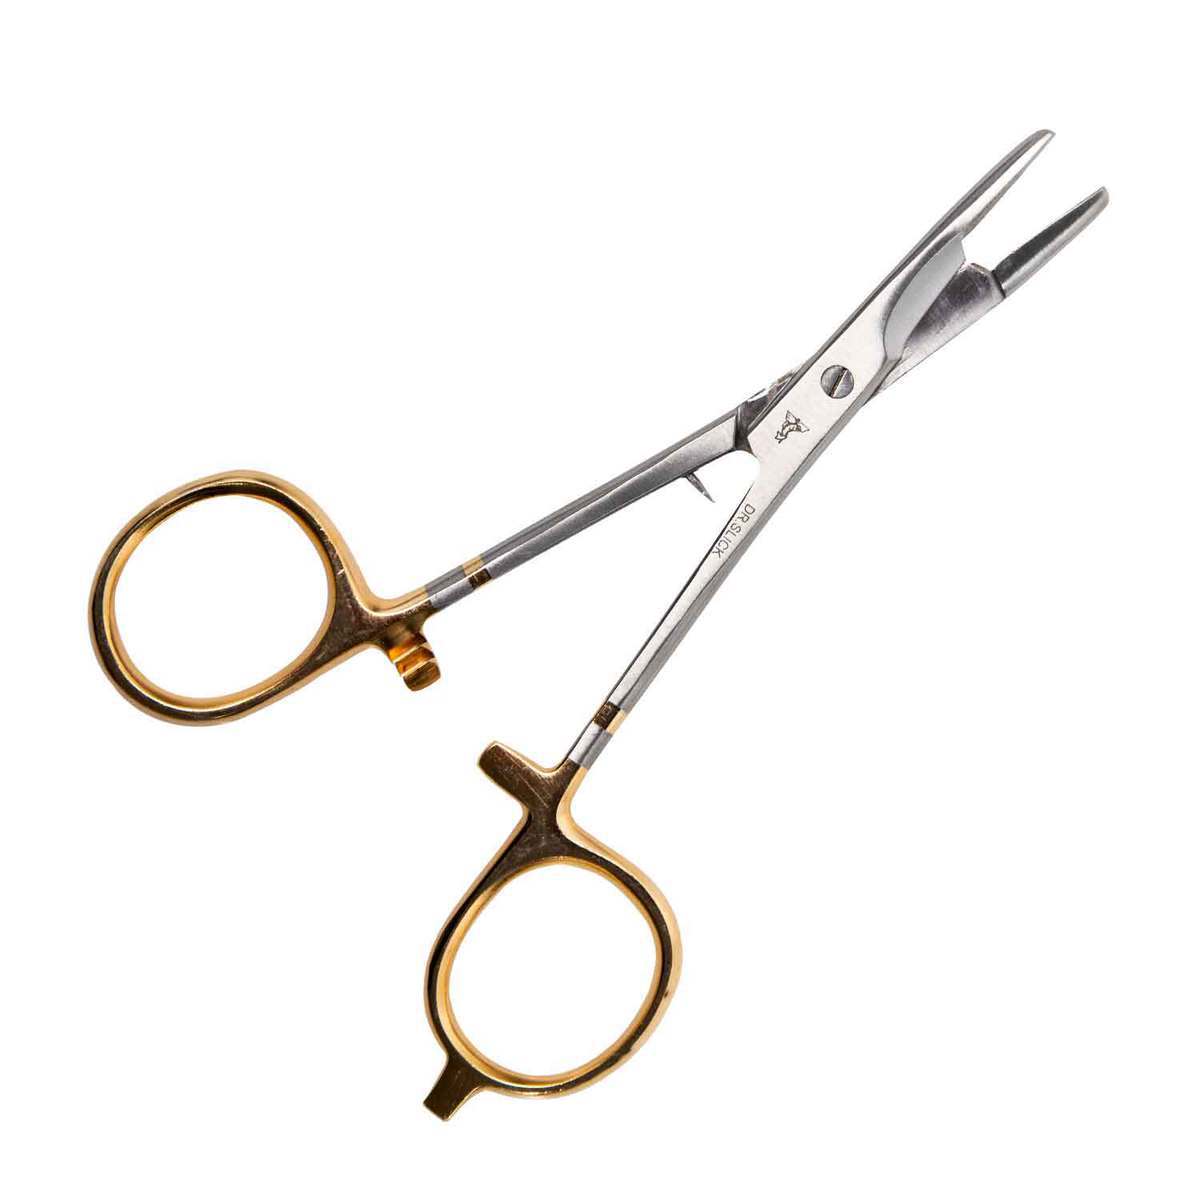 Dr. Slick Straight Tip Scissor Clamp Fly Tying Tool - Gold Loops